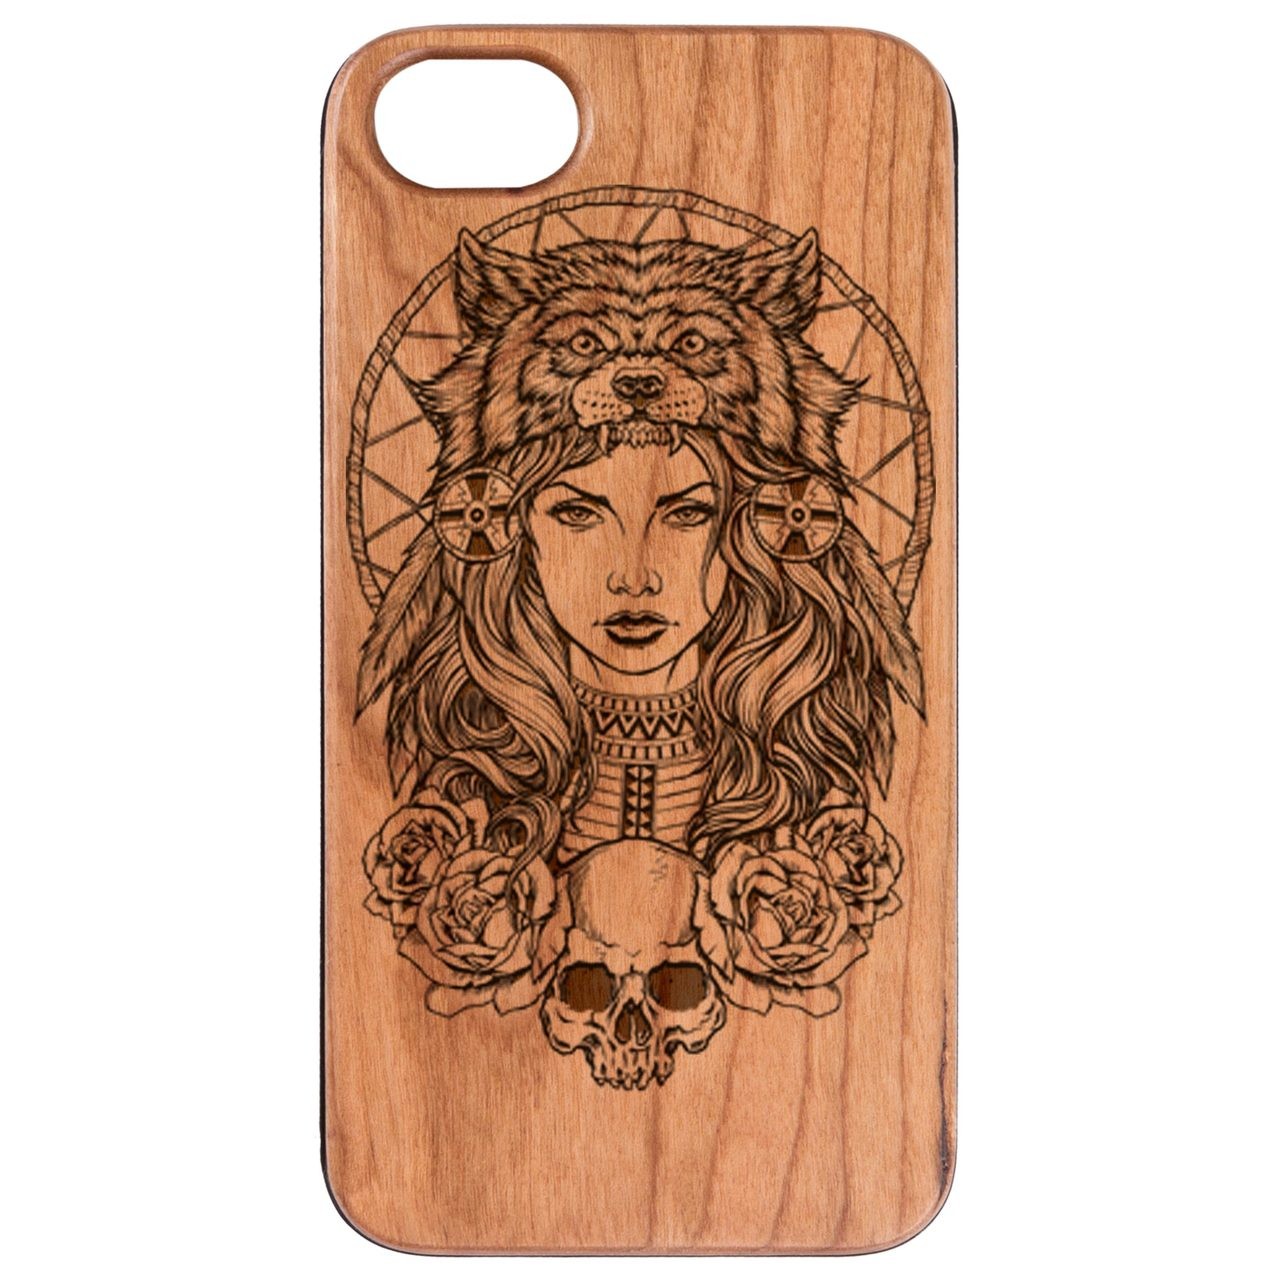  Native American Girl - Engraved - Wooden Phone Case - IPhone 13 Models